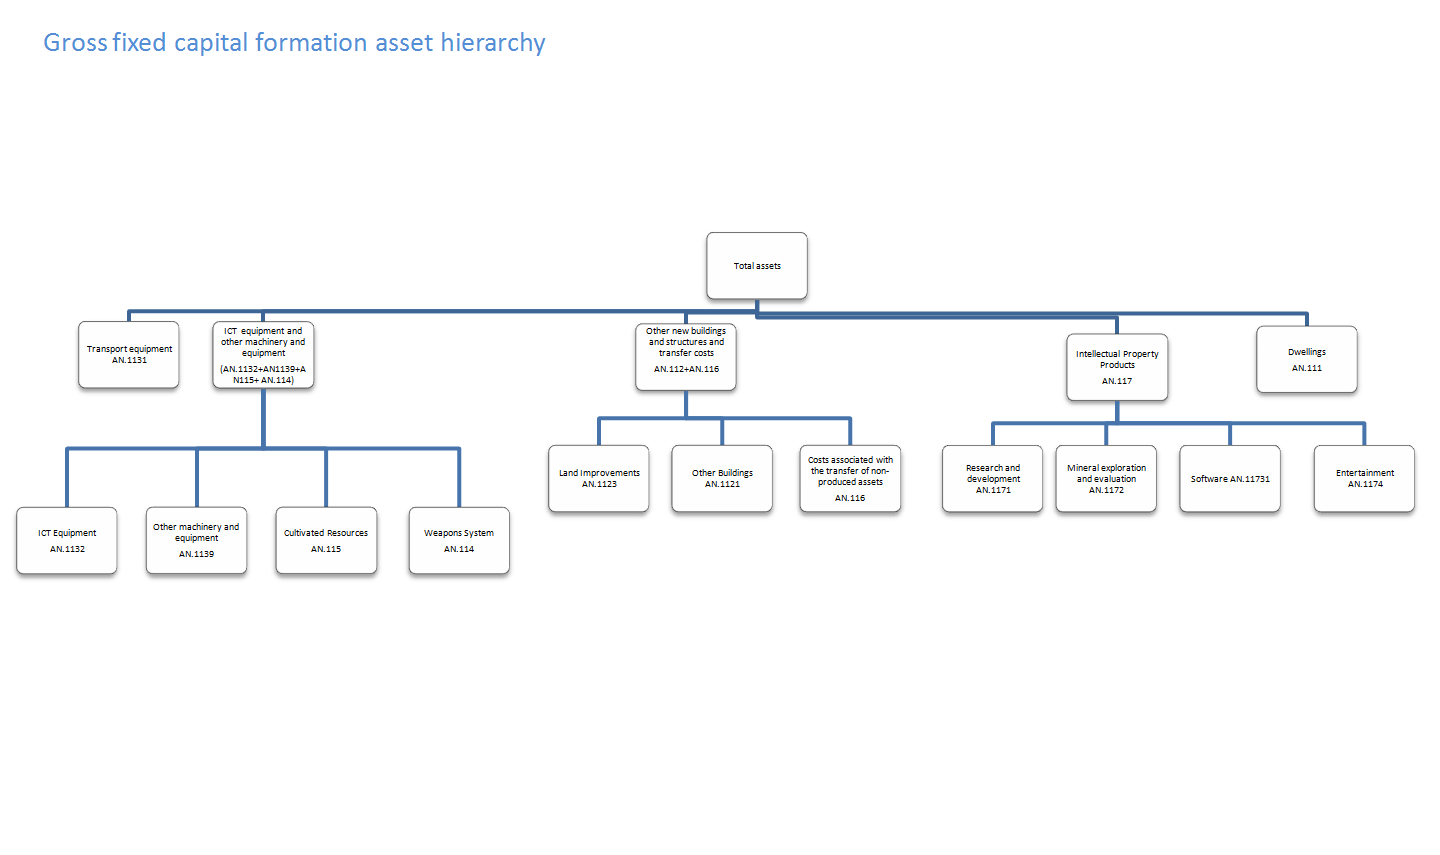 Gross fixed capital formation asset hierarchy